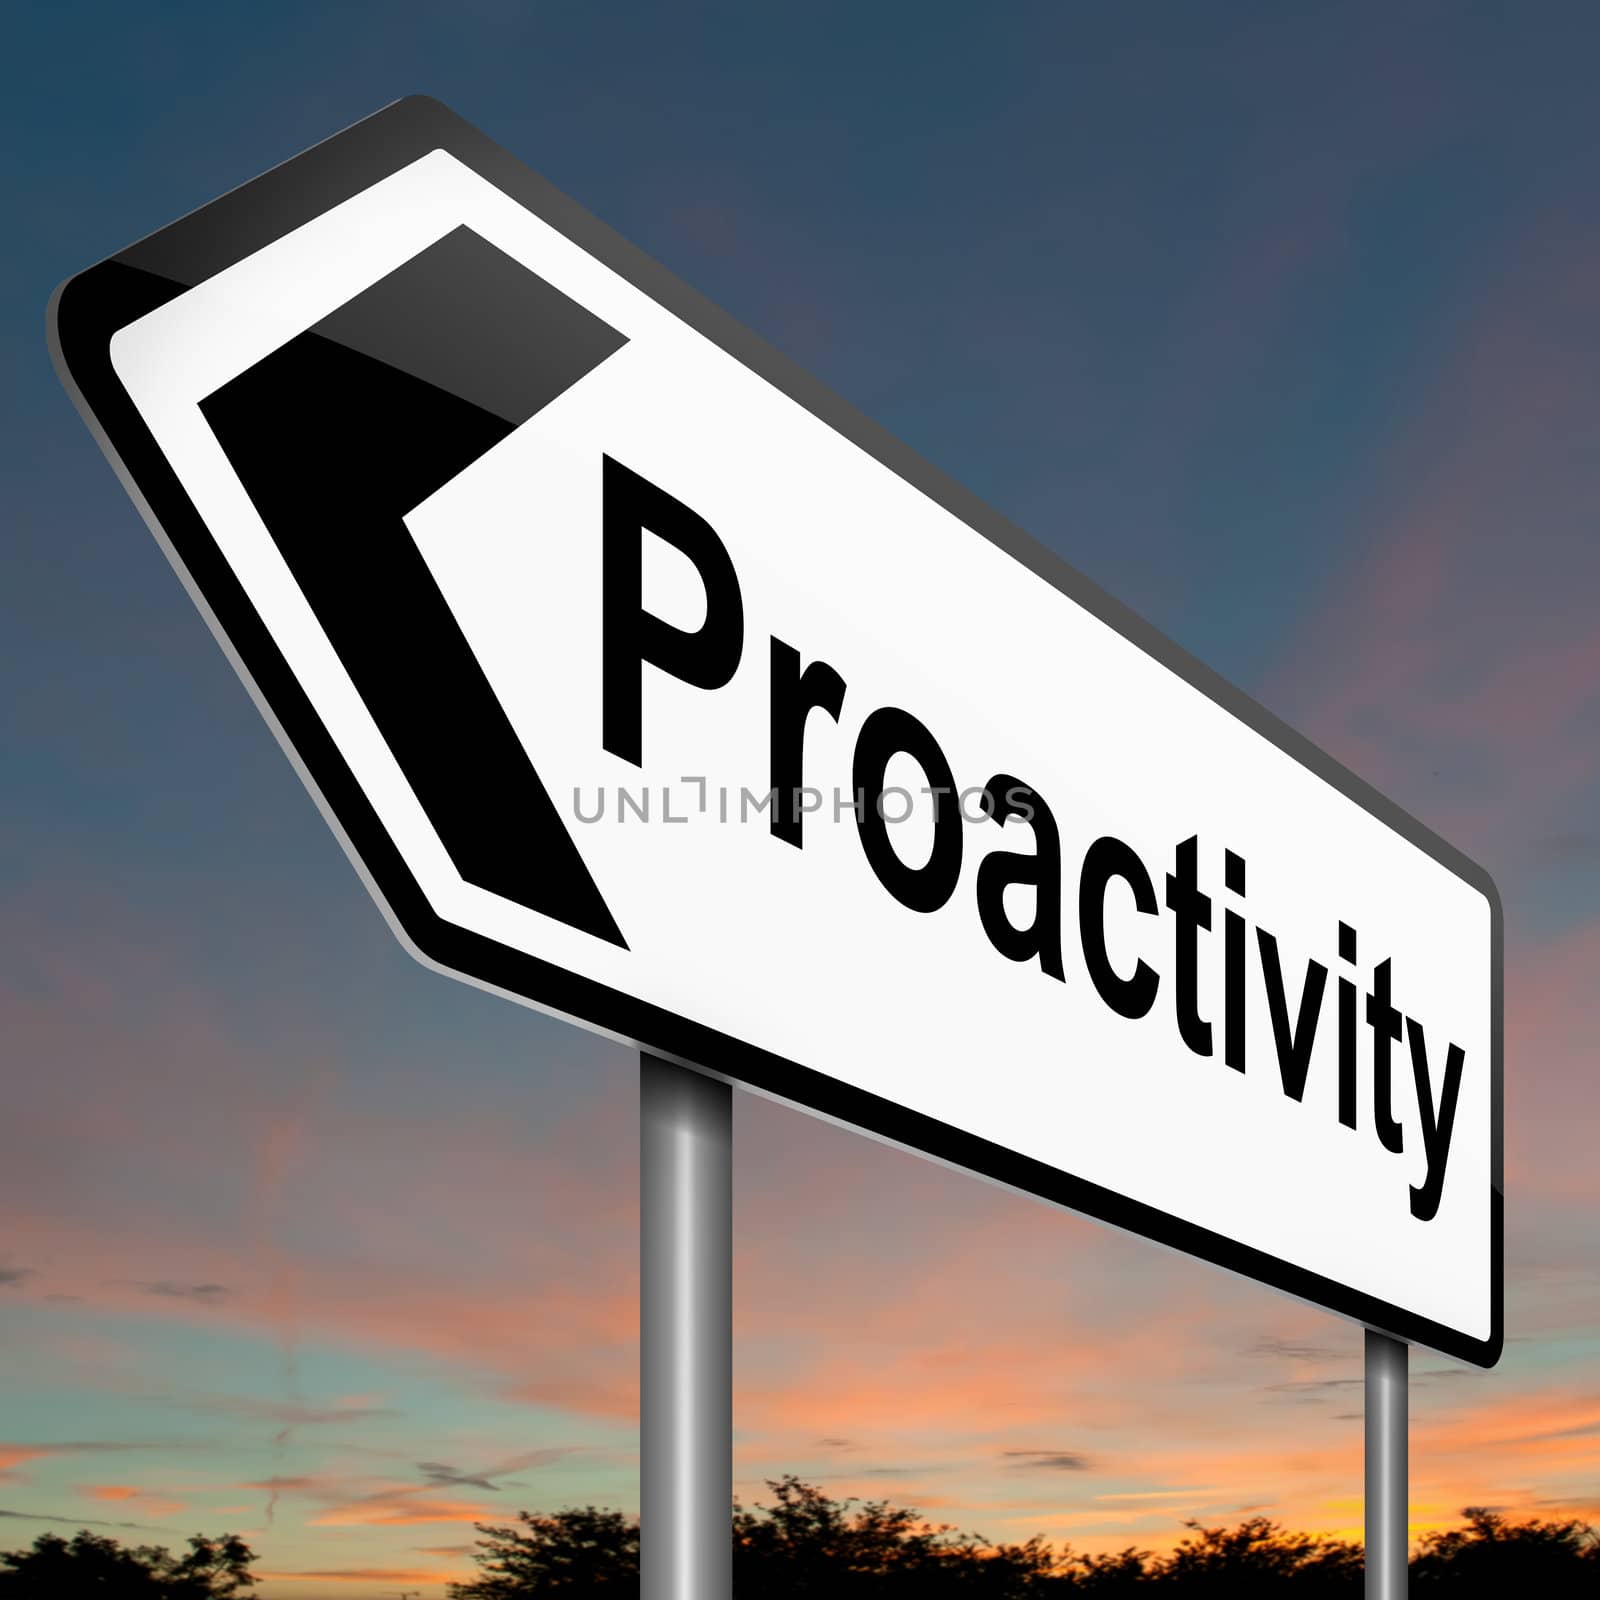 Illustration depicting a roadsign with a proactive concept. Sky background.